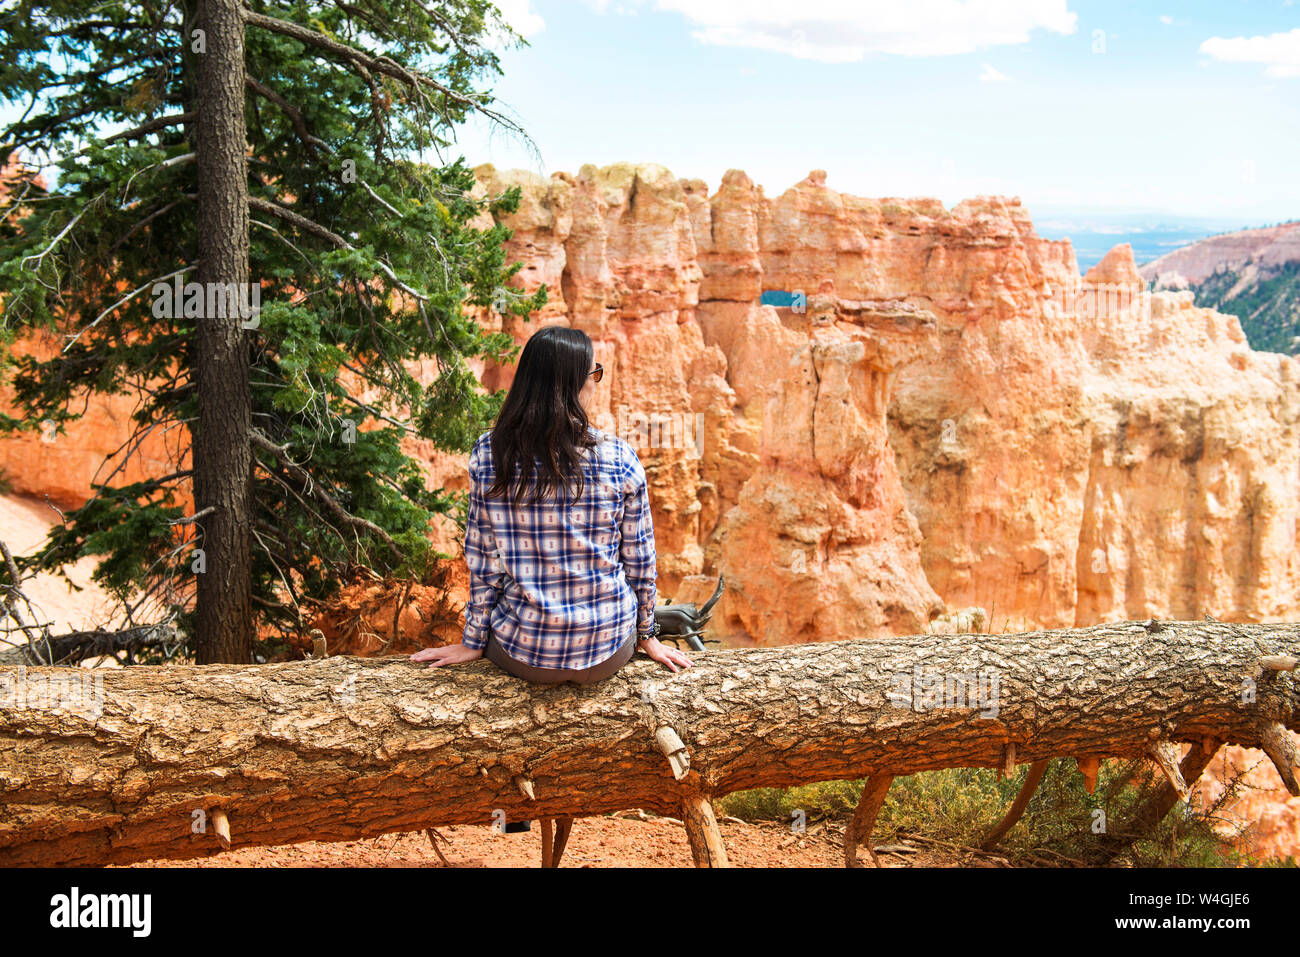 Traveler woman sitting on the trunk of a fallen tree enjoying the view in Bryce Canyon, Utah, USA Stock Photo